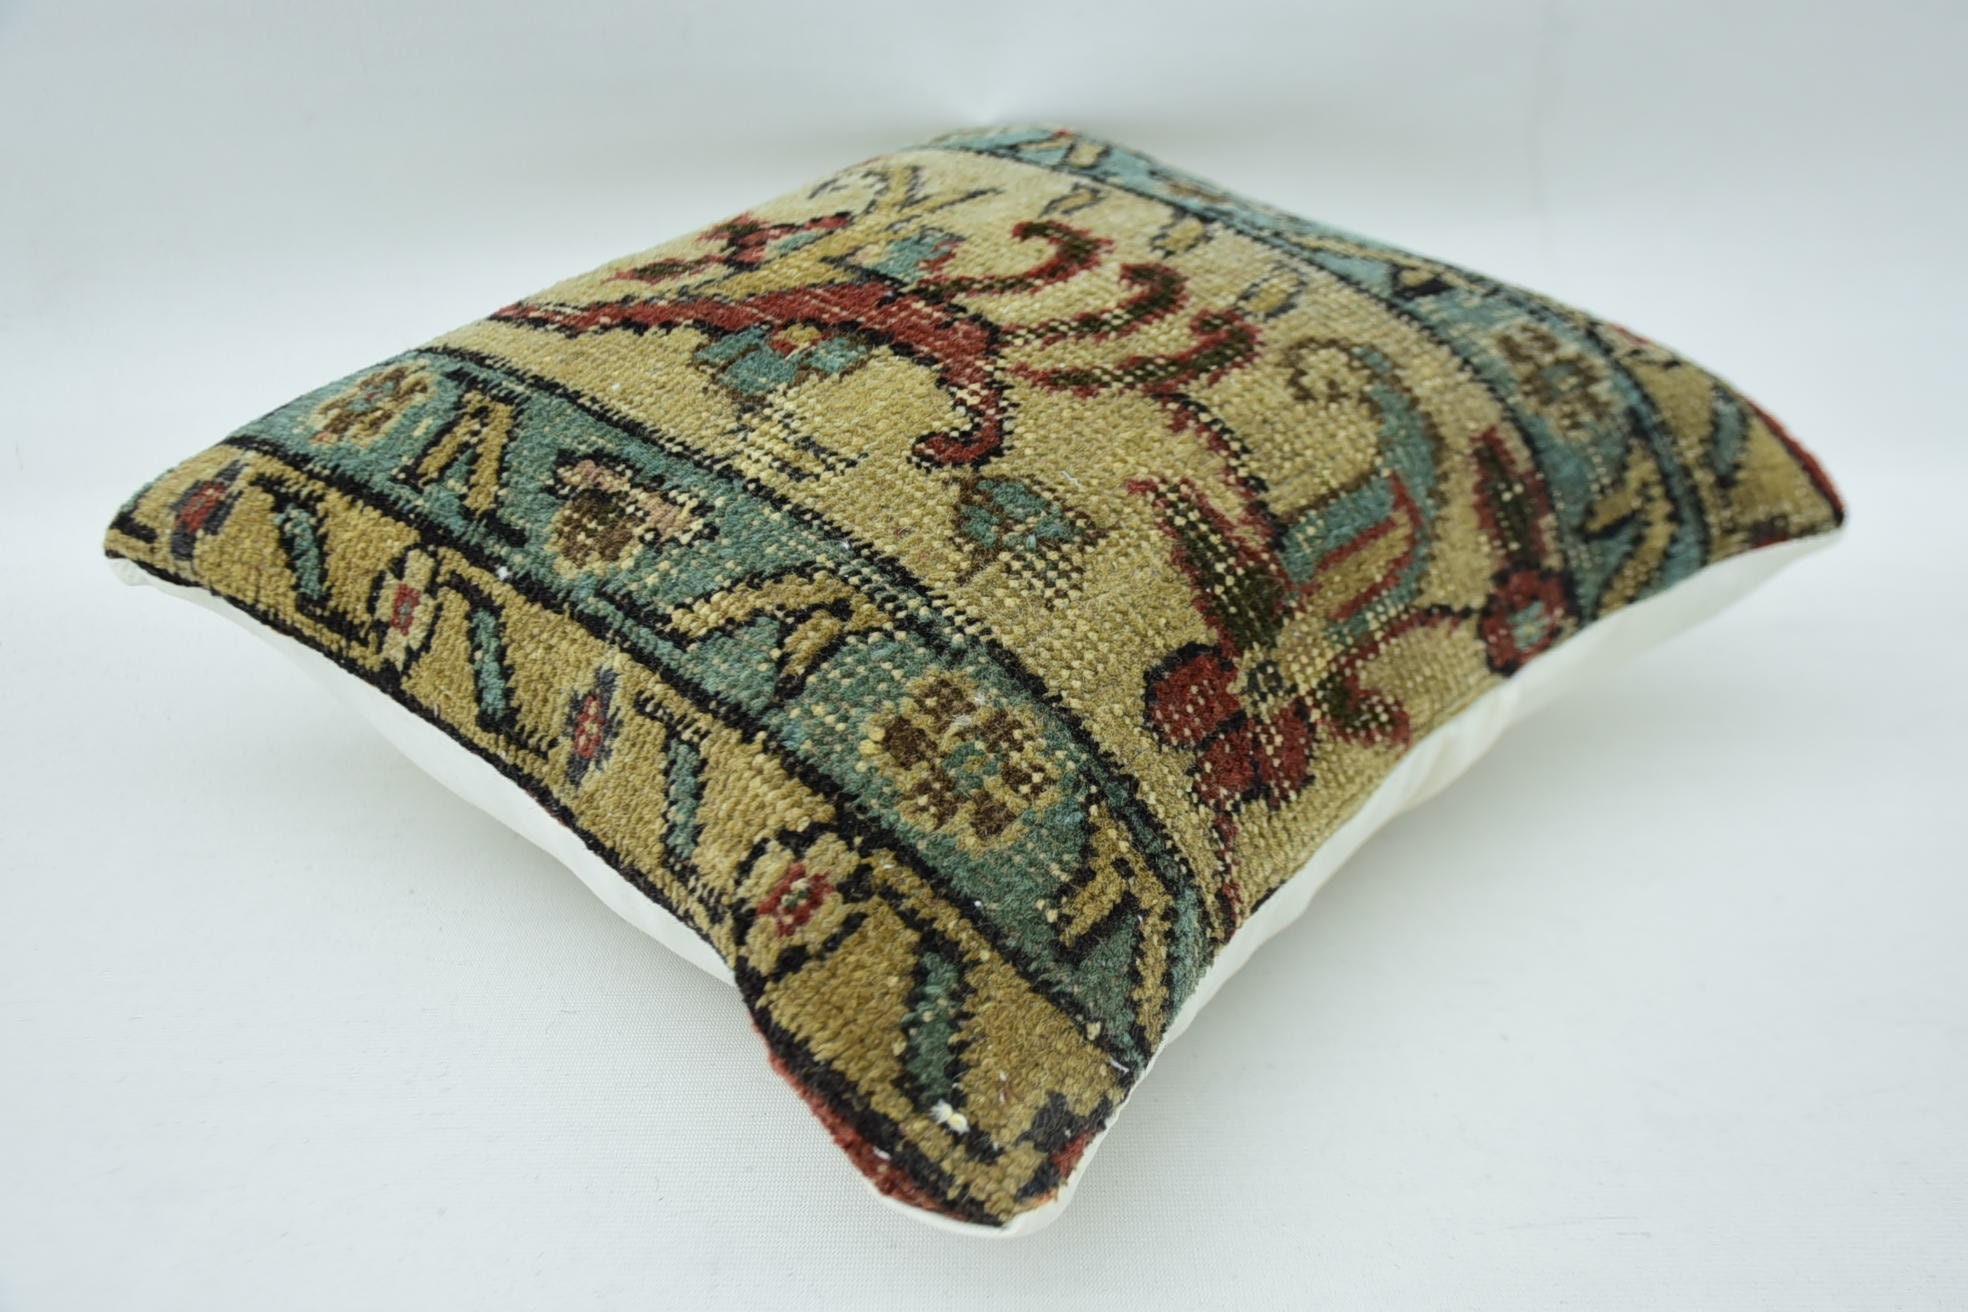 Vintage Kilim Throw Pillow, One Of A Kind Cushion, Pillow for Couch, Boho Pillow Sham Cover, 14"x14" Beige Pillow Case